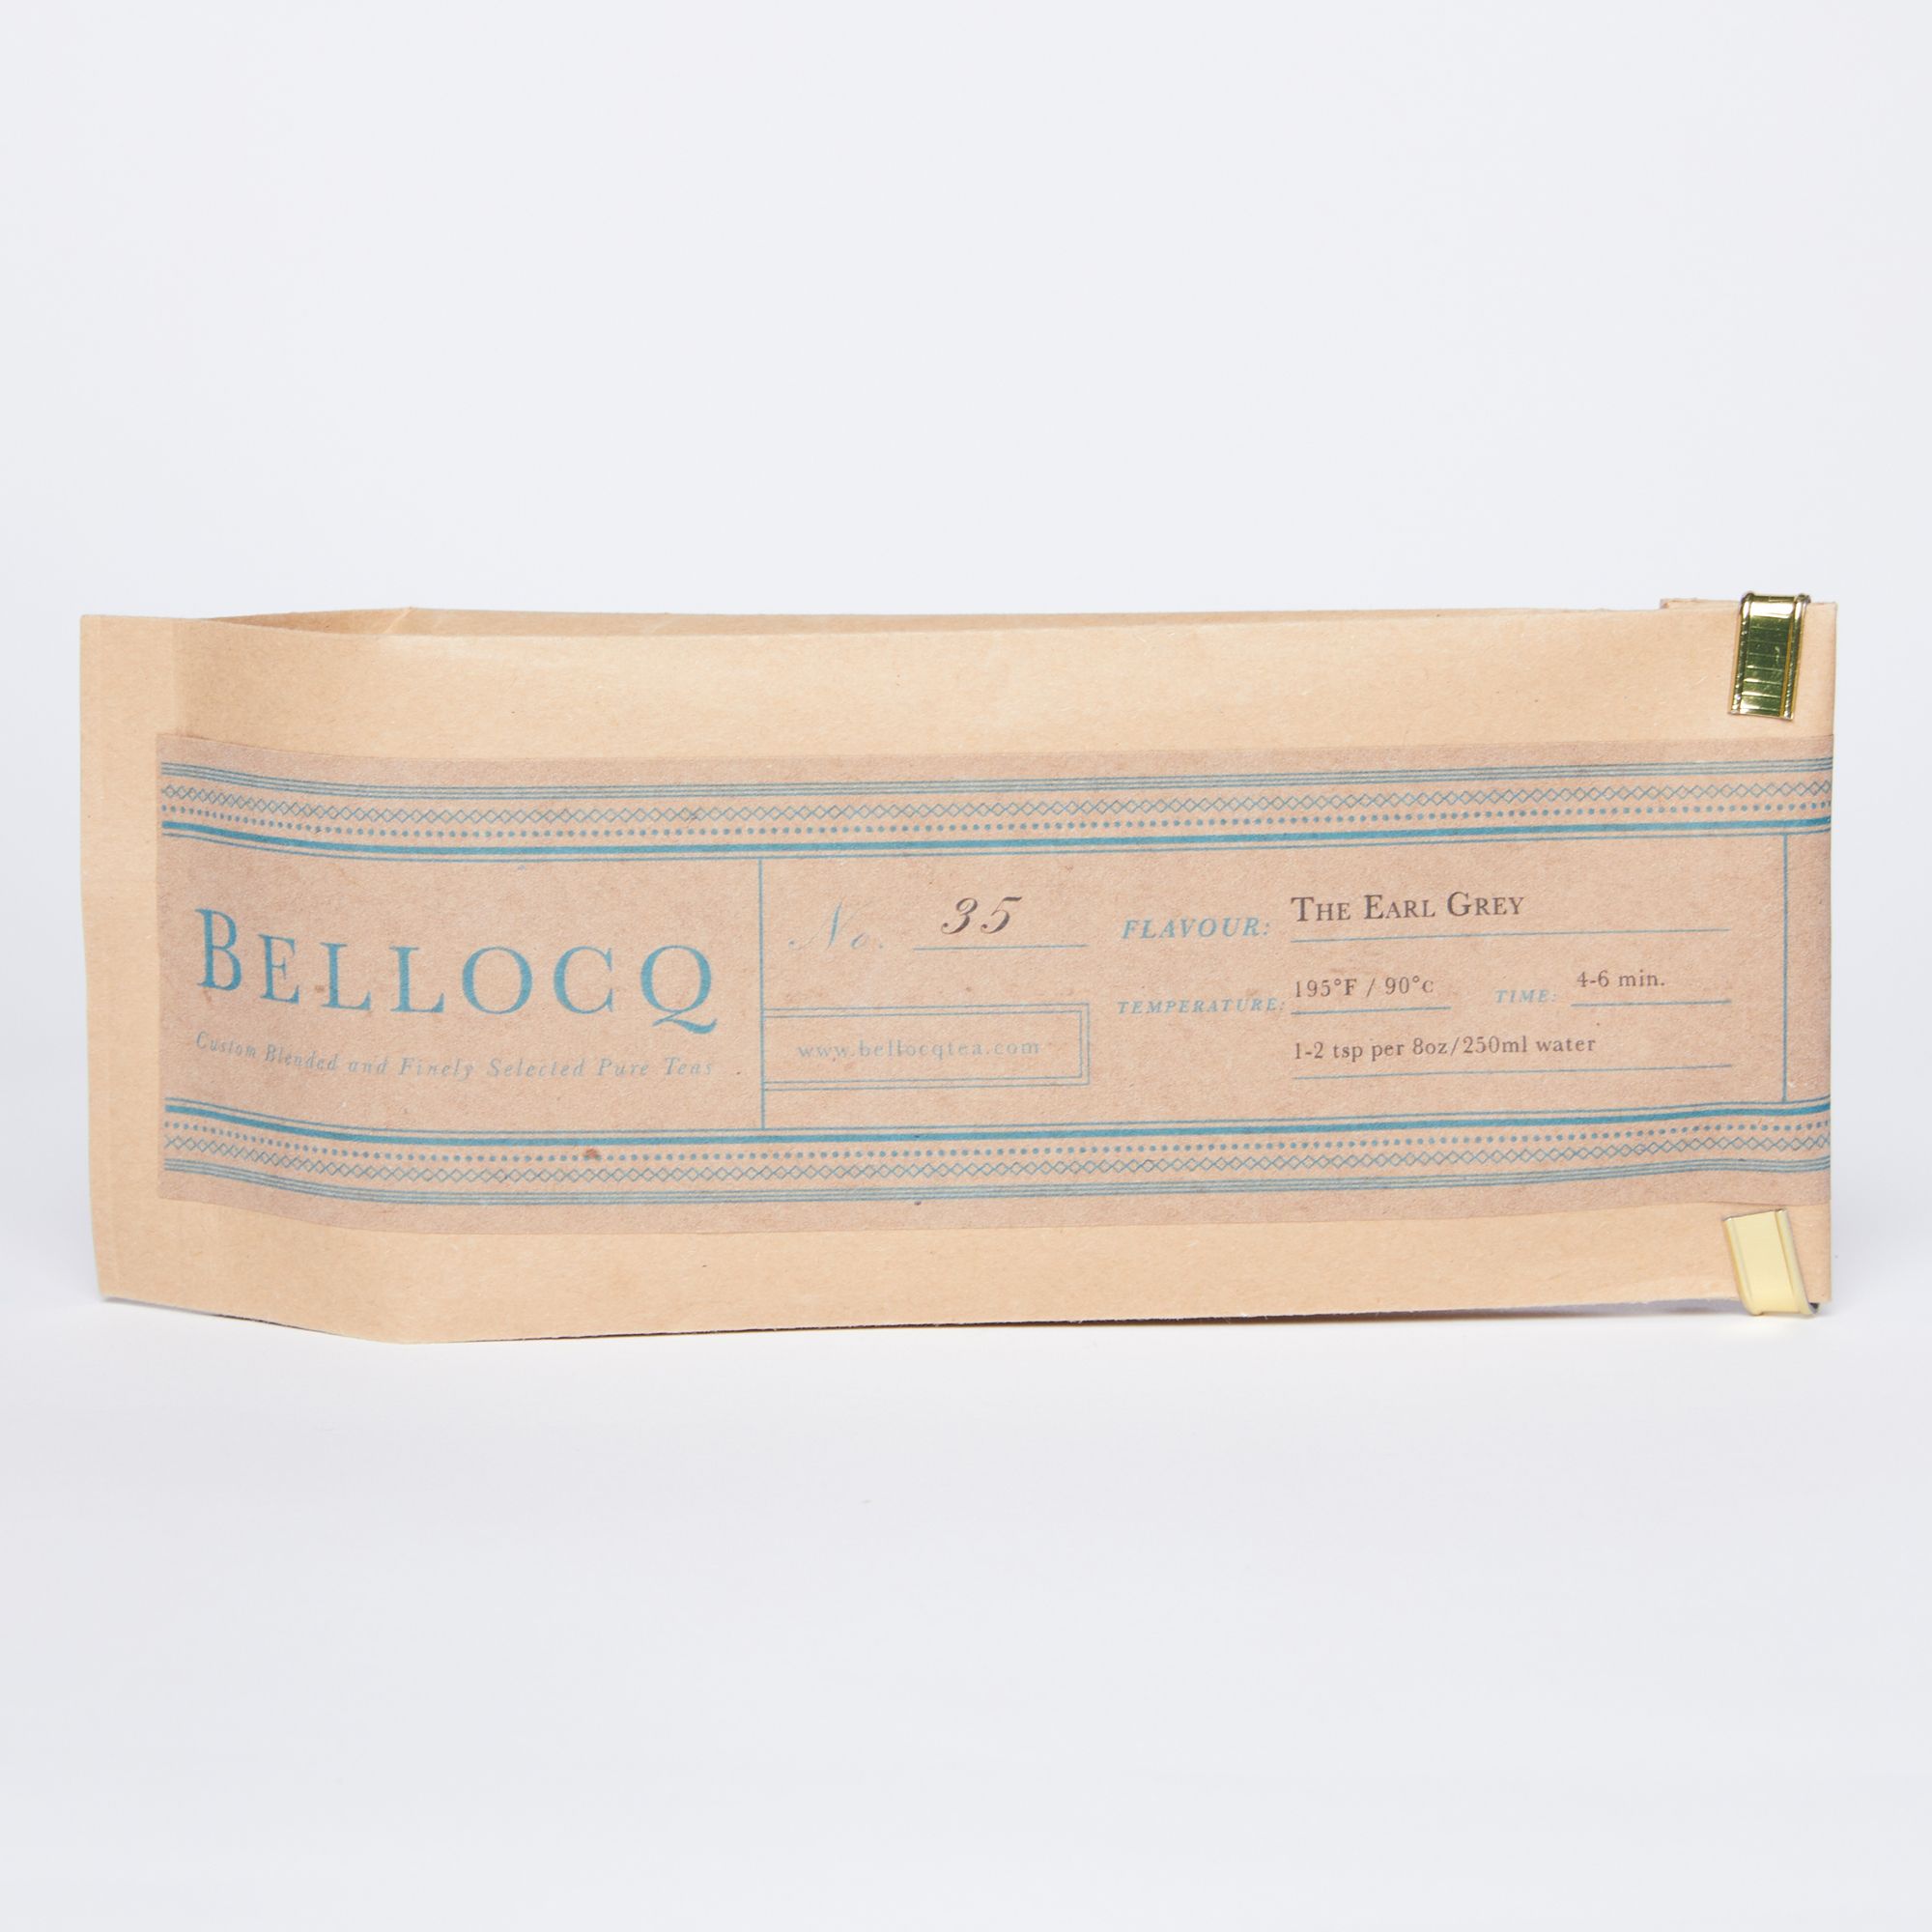 Brown paper bag with blue stripes on each side and a 'Bellocq' logo and label. 